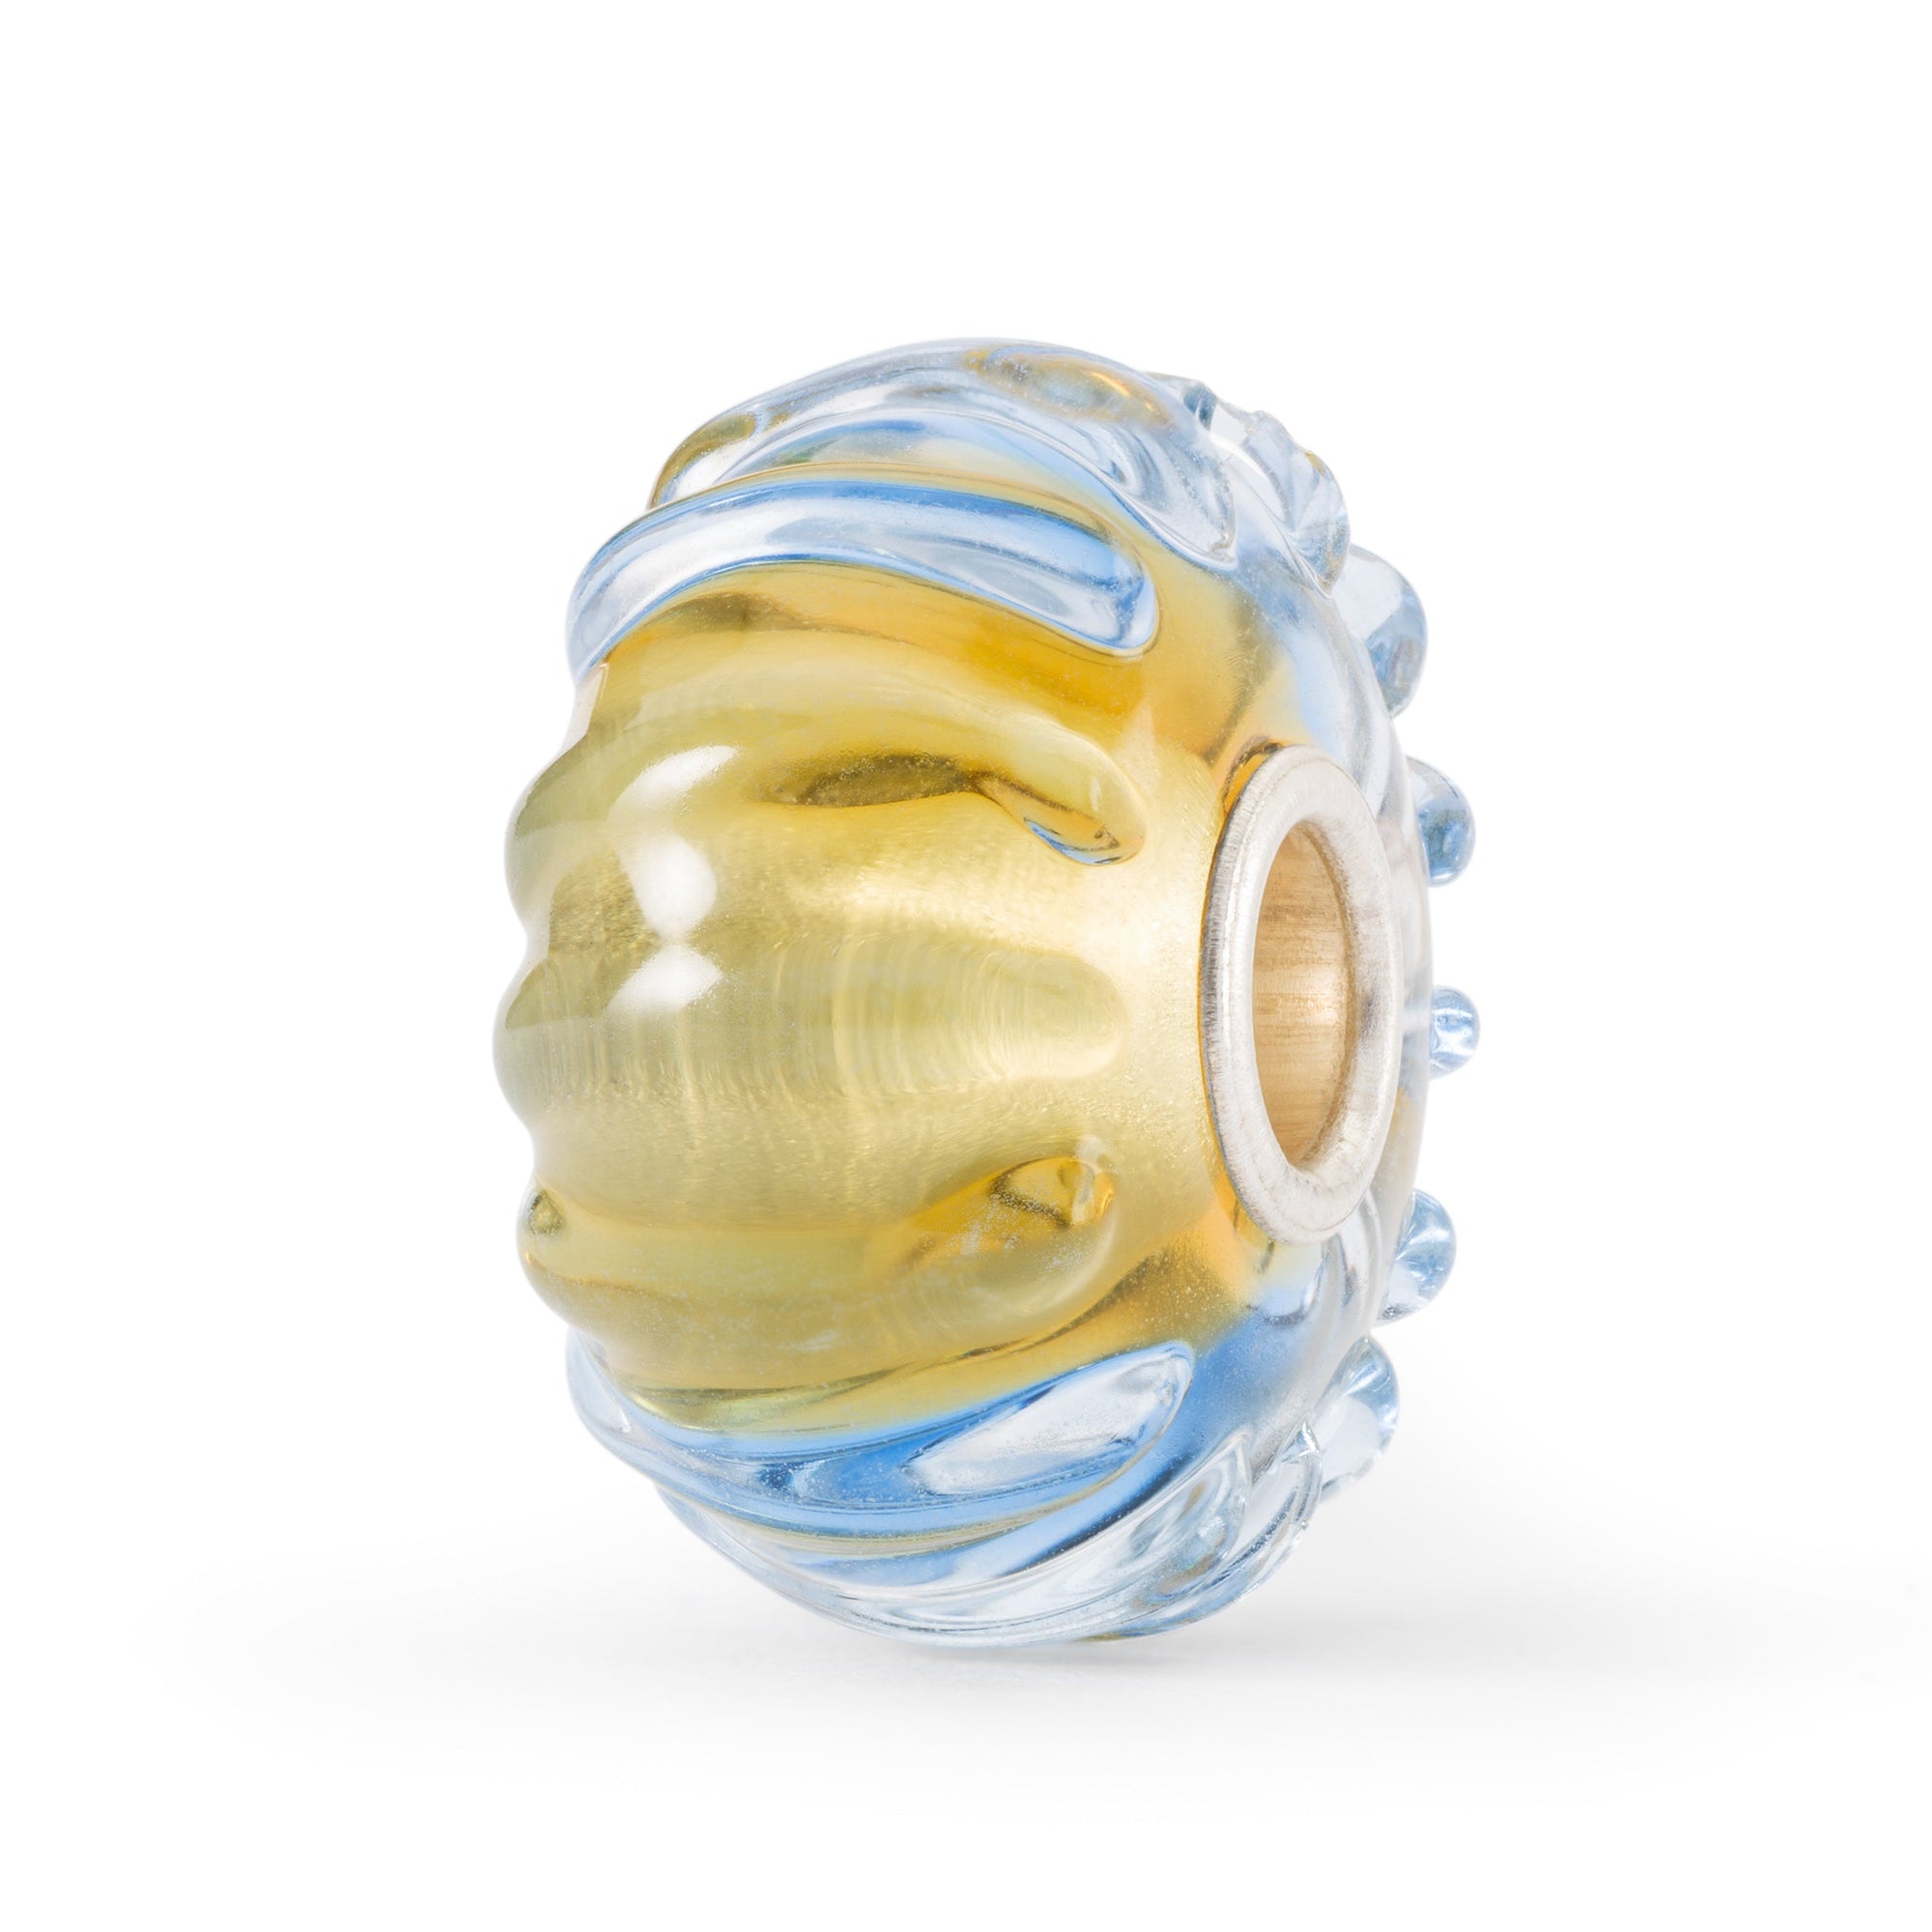 trollbeads water flow glass bead with patterns of ripples of blue waves over a yellow, sandy background